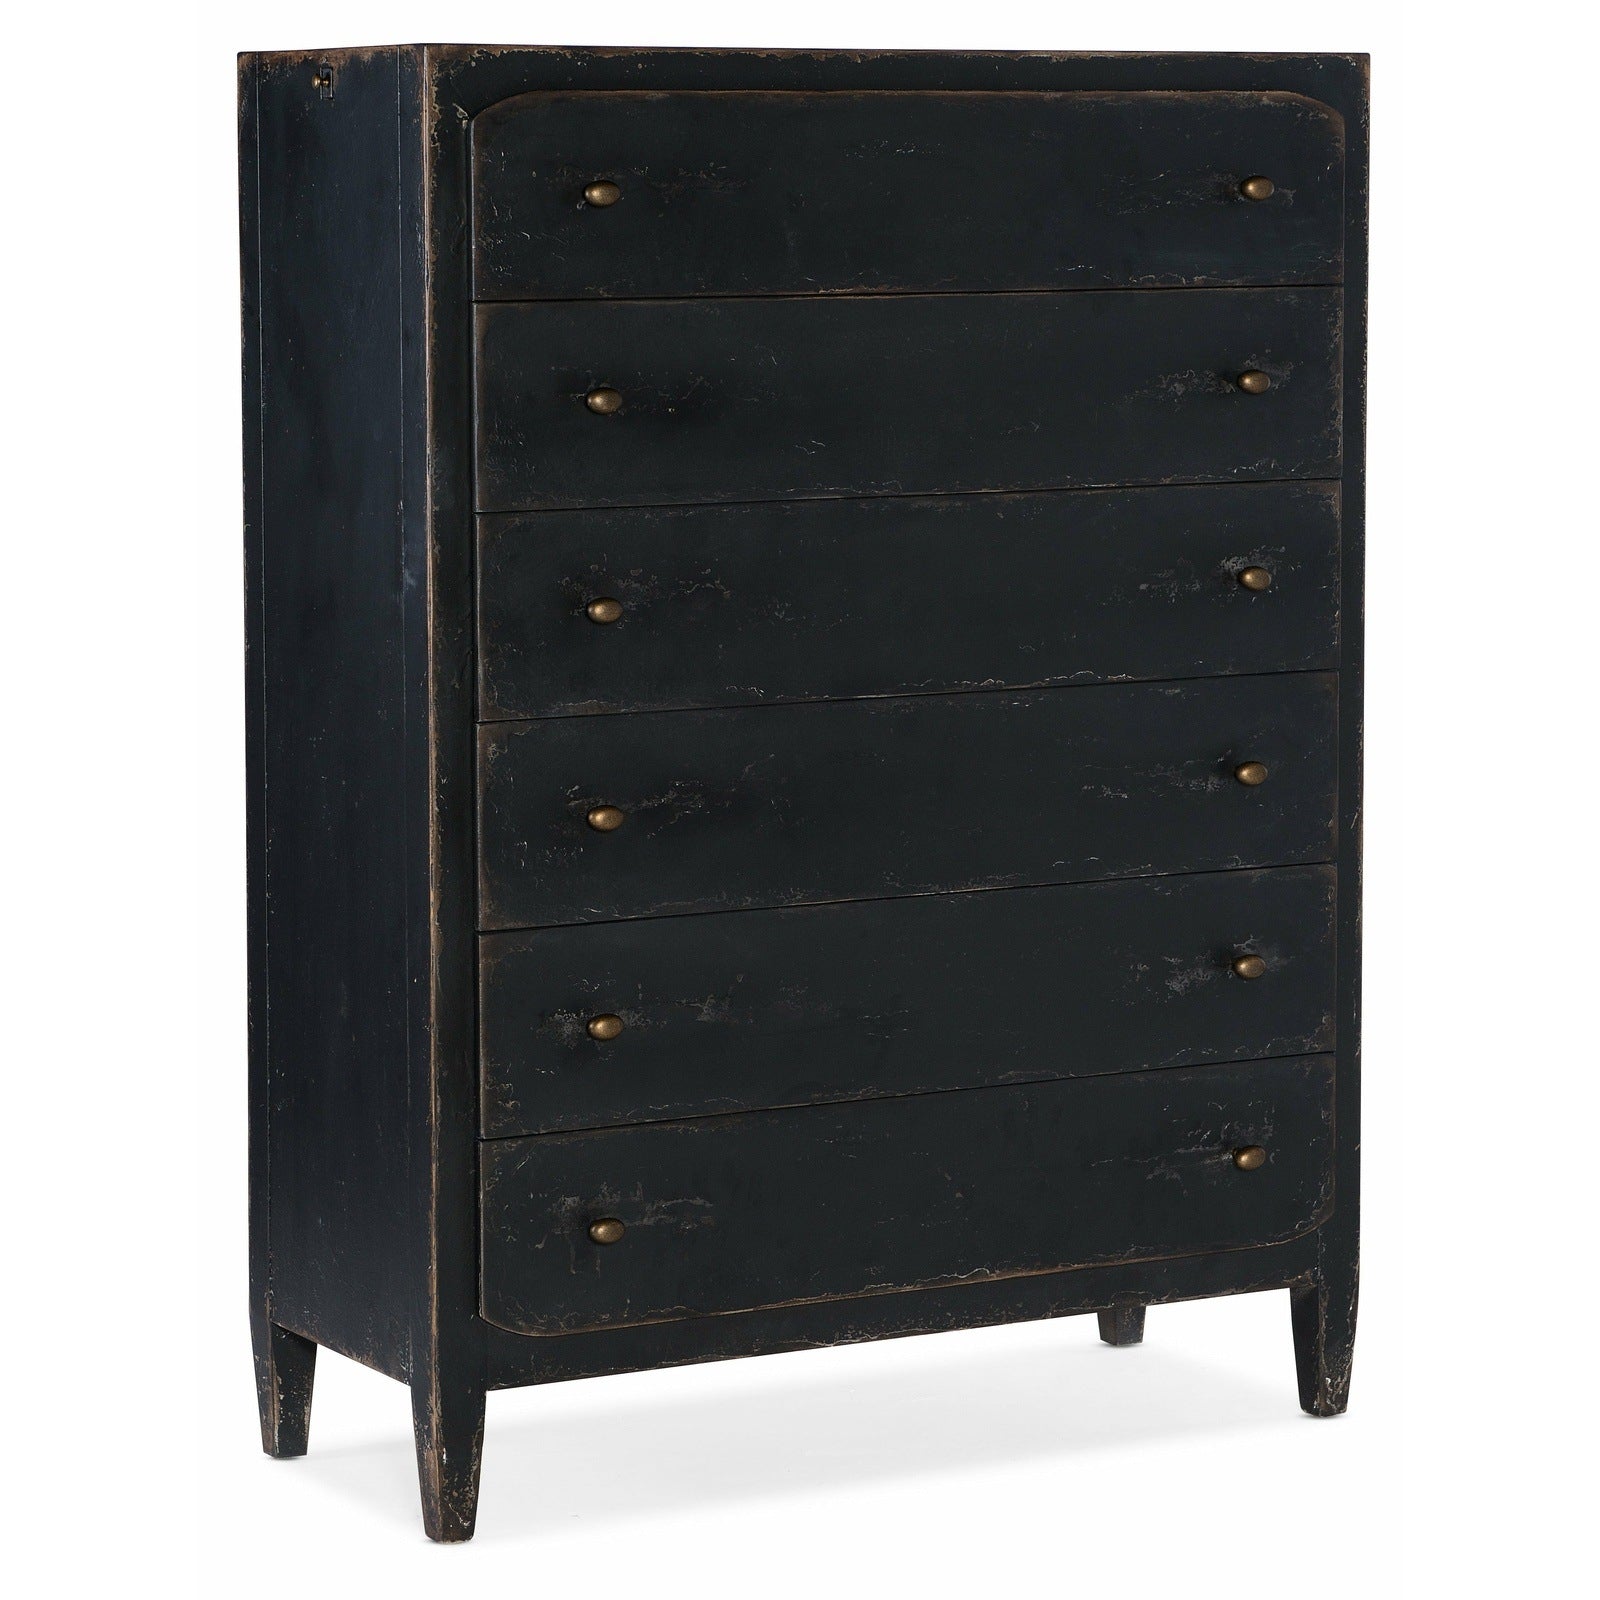 Ciao Bella Six-Drawer Chest- Black